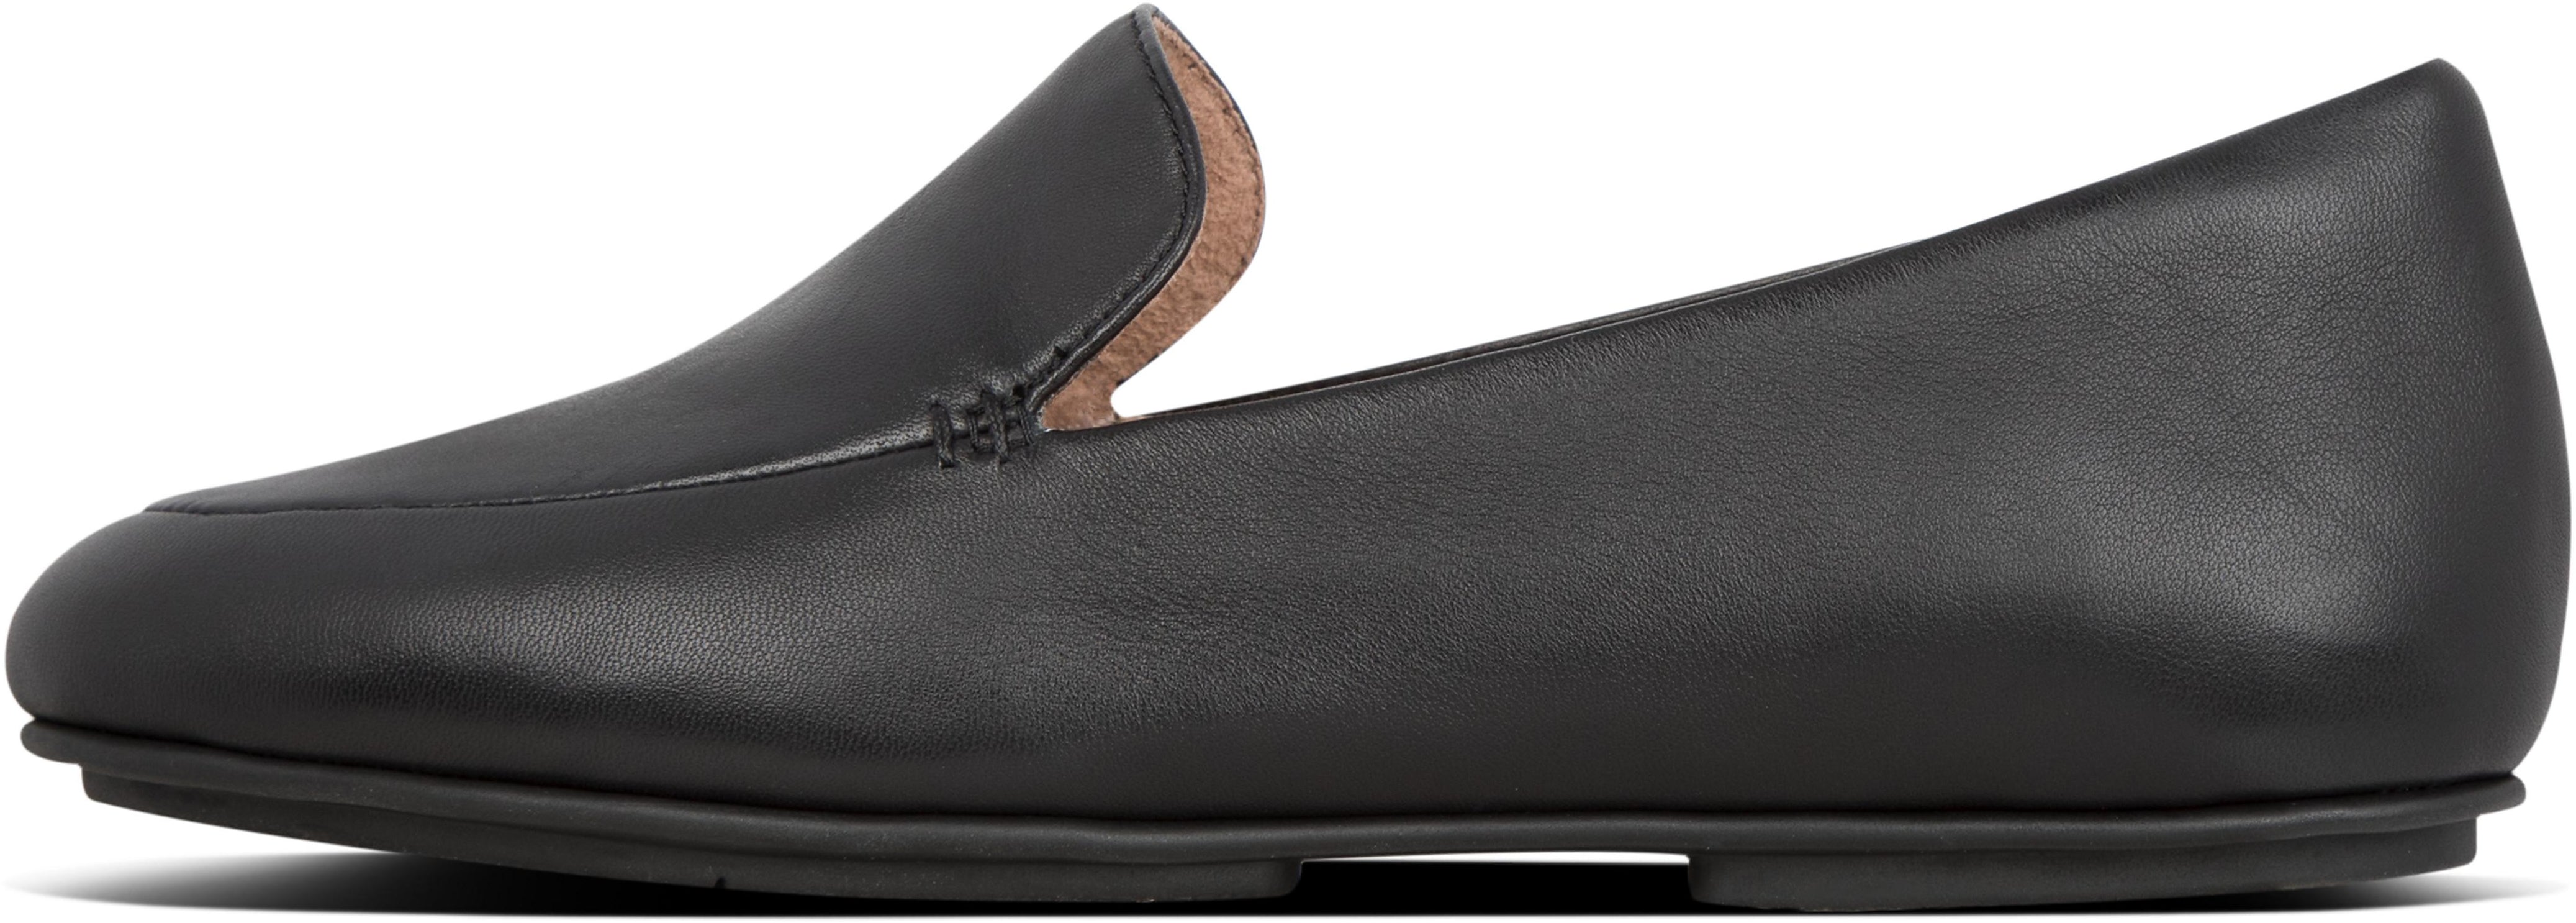 Lena Loafers in All Black from the side